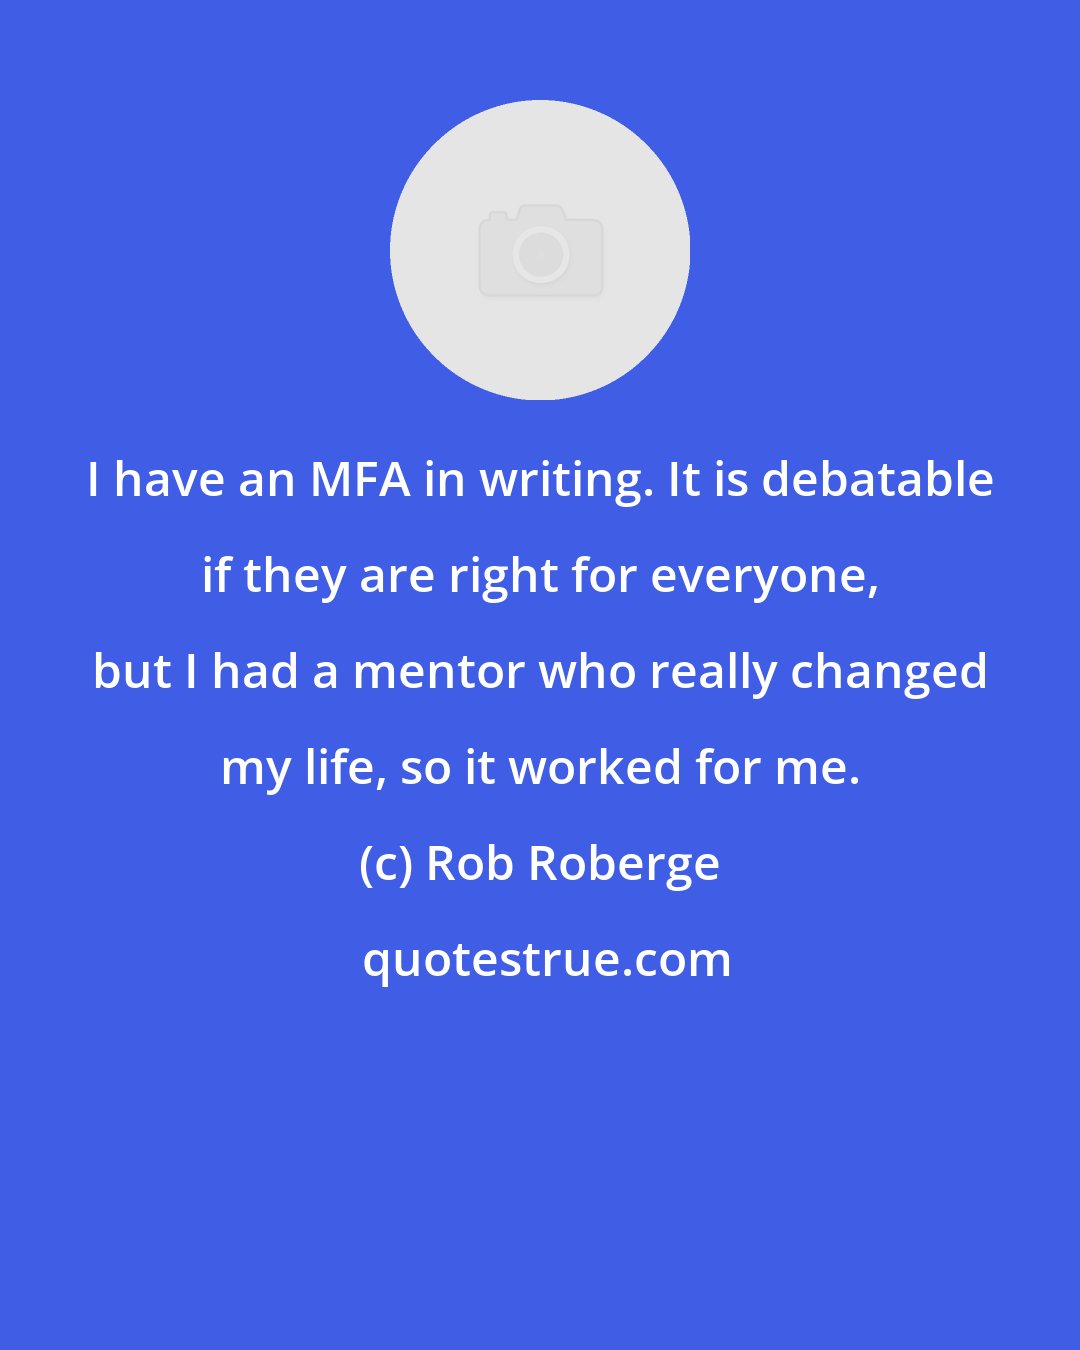 Rob Roberge: I have an MFA in writing. It is debatable if they are right for everyone, but I had a mentor who really changed my life, so it worked for me.